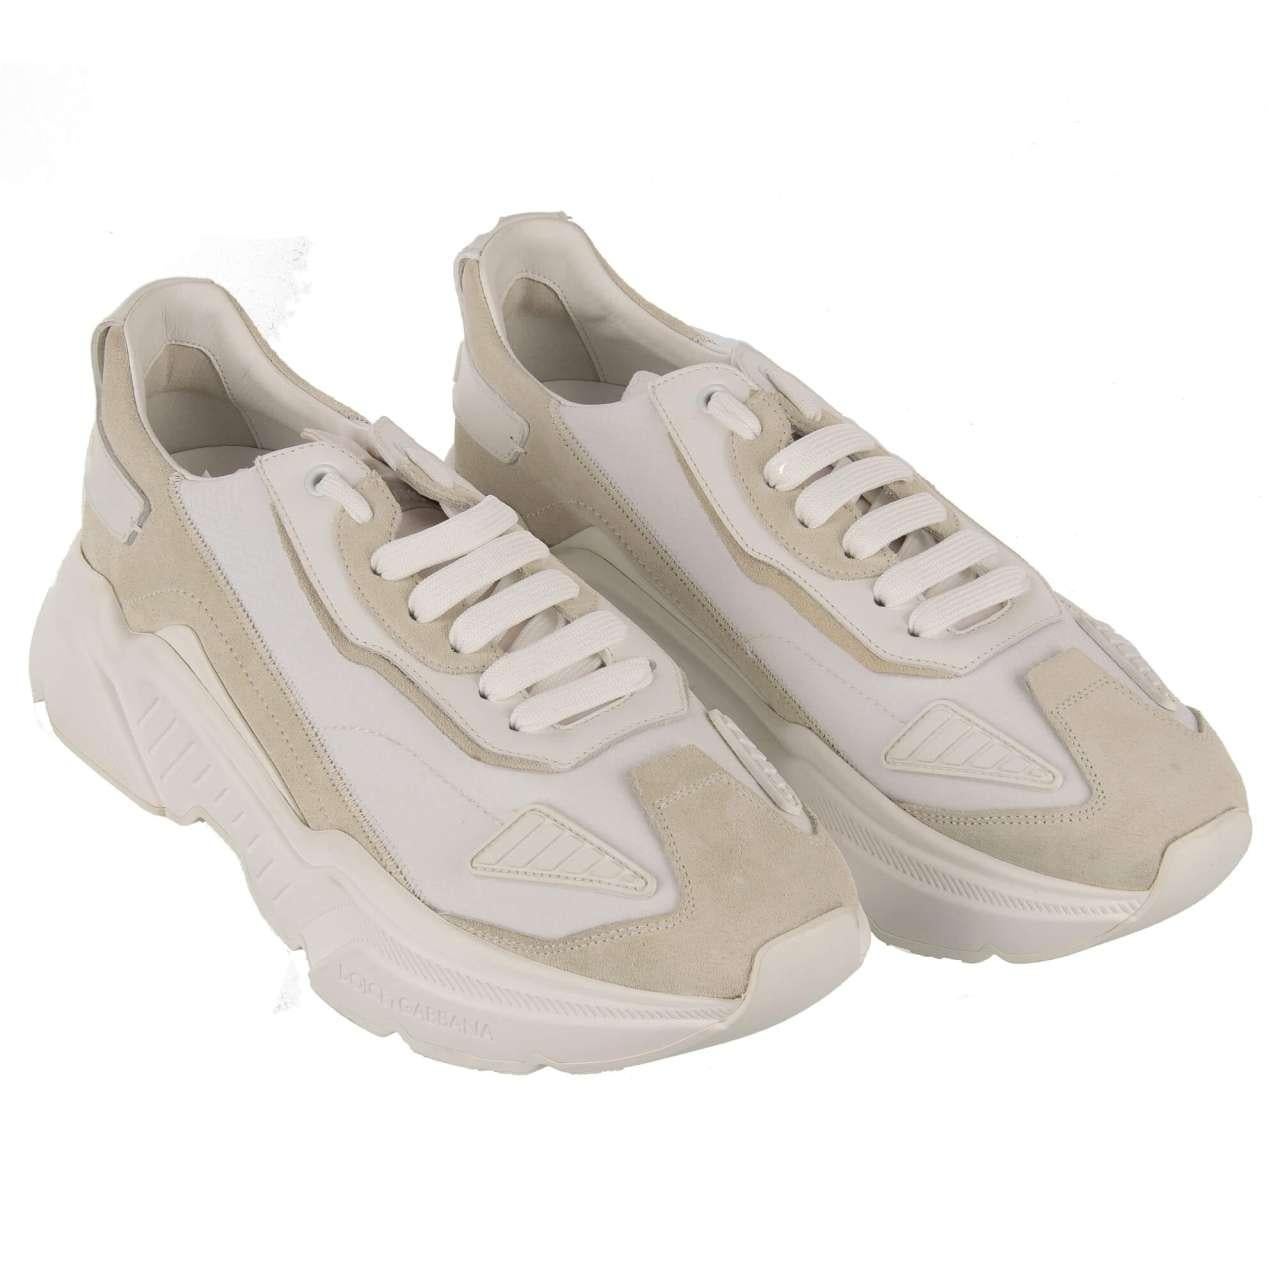 - Low-Top Sneaker DAYMASTER with massive sole and DG logo on the back in white by DOLCE & GABBANA - New with Box - Model: CS1765-AX014 - Material: 60% Calfskin, 40% Nylon - Sole: Rubber - Color: White - Leather insole - Logo on the back -